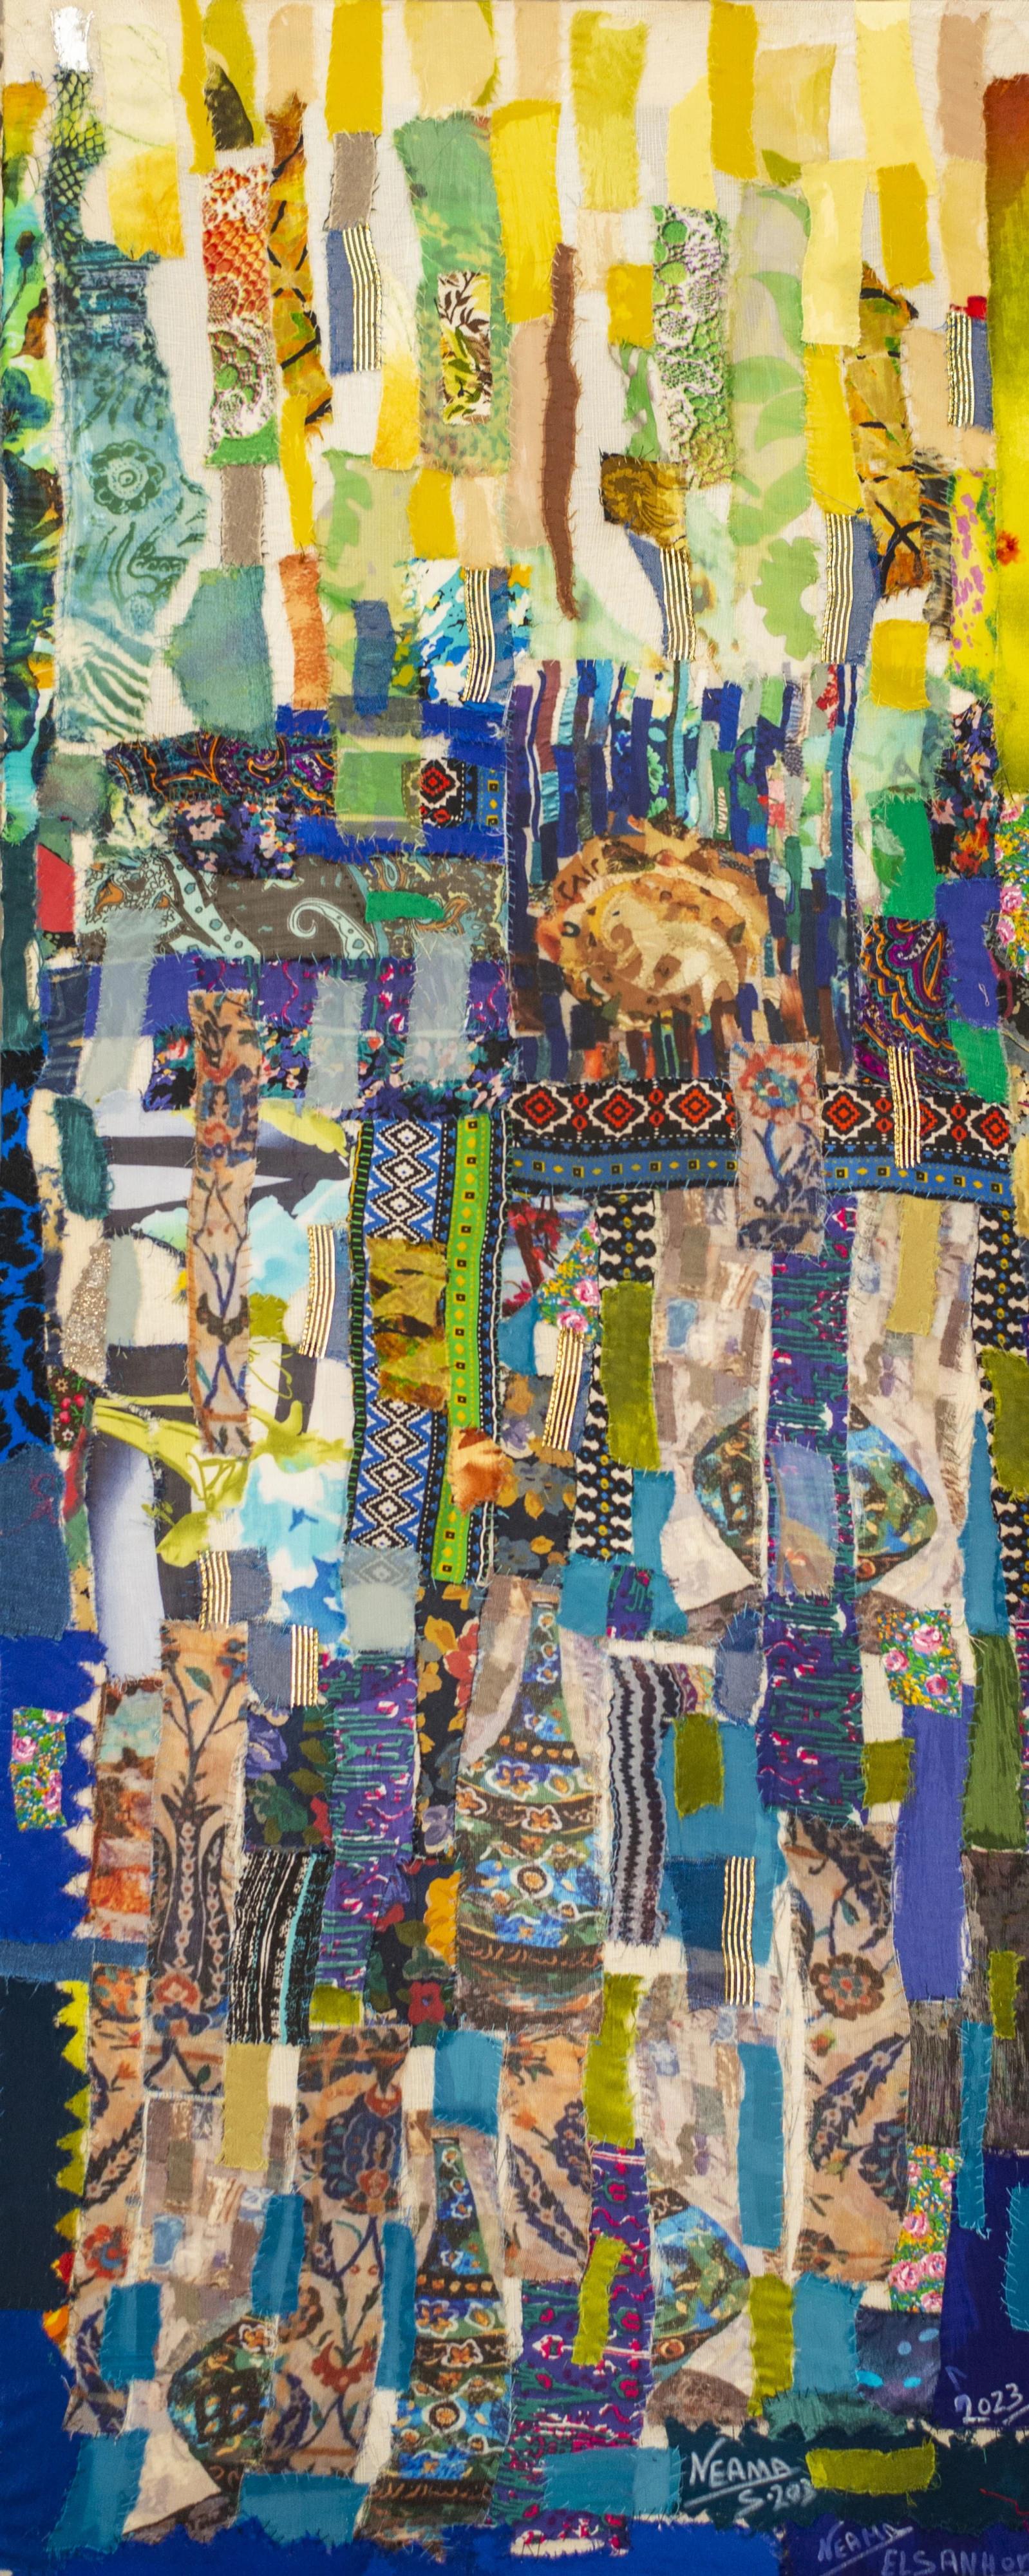 "The New Age" Textile Painting 43" x 18" inch by Neama El Sanhoury

Medium: fabric appliqué on linen

"Fragments of Time" series: 
Ultimately, El Sanhoury’s work is contemplated and generated in a thoroughly modern constitution that appeals to and